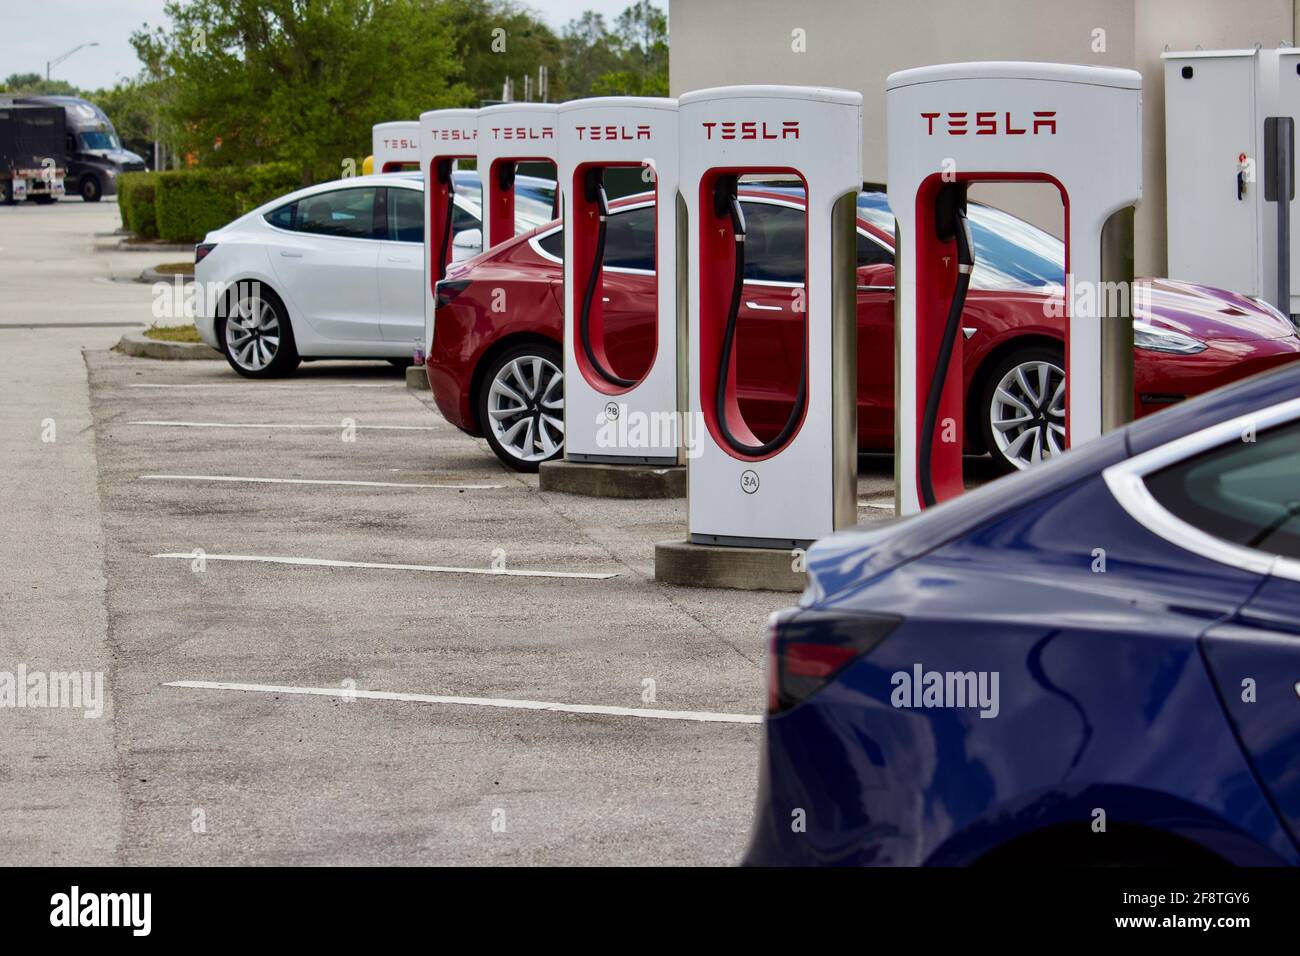 2/23/2021 Florida Turnpike service plaza. Tesla branded charging stations for electric vehicles Stock Photo